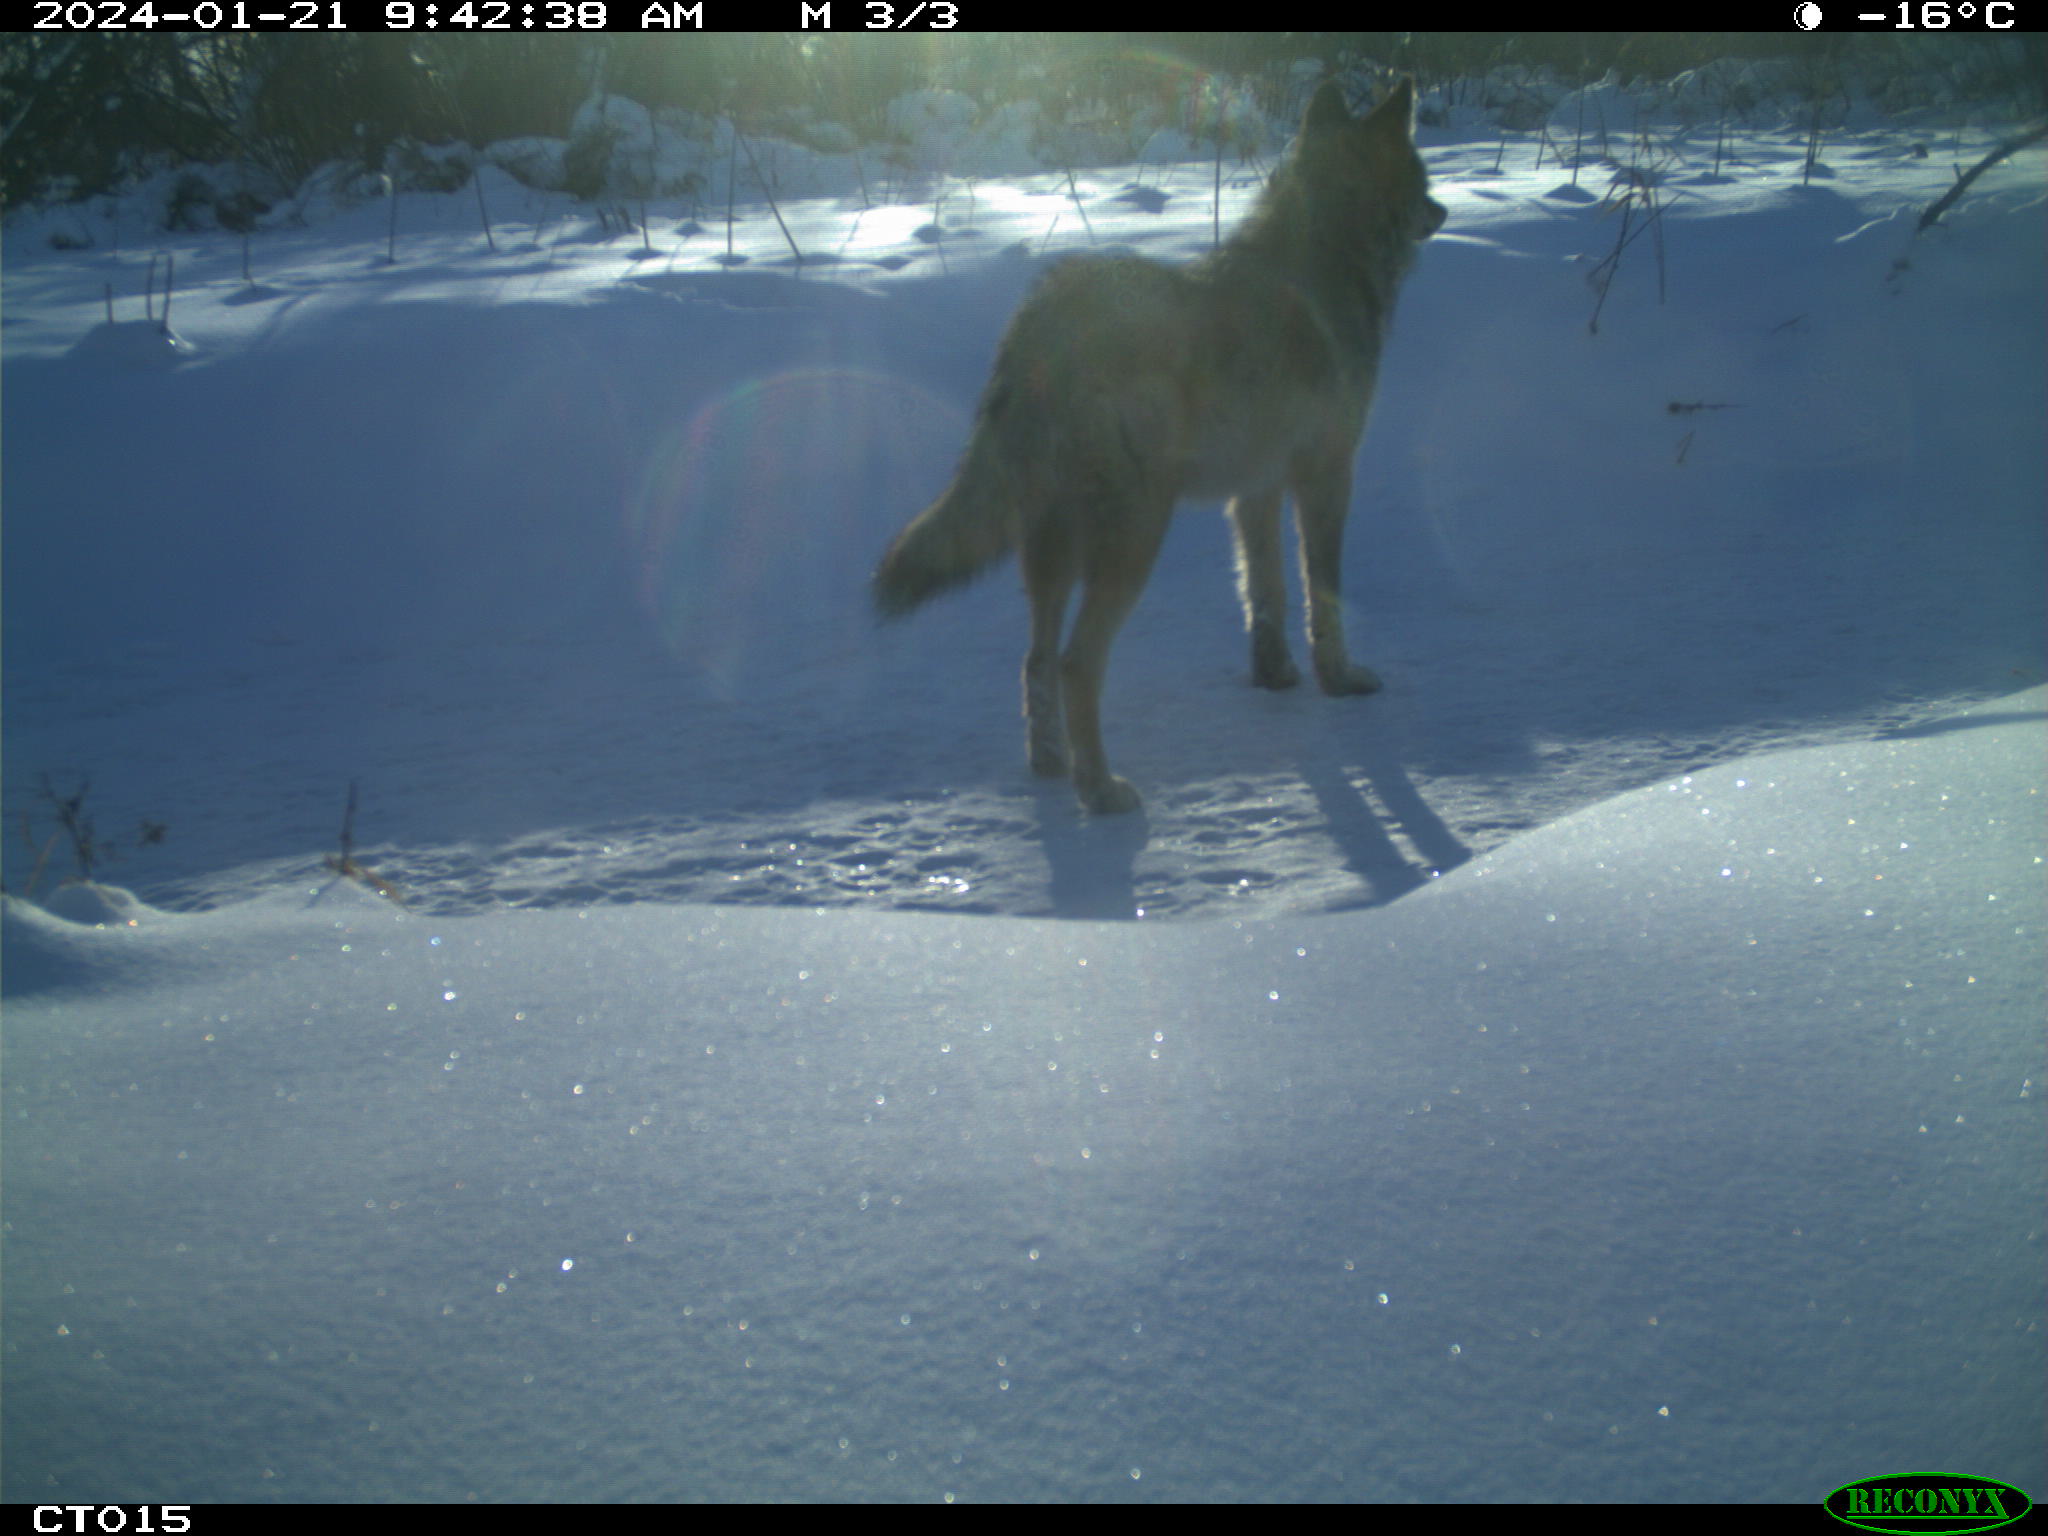 A Wolf standing in snow